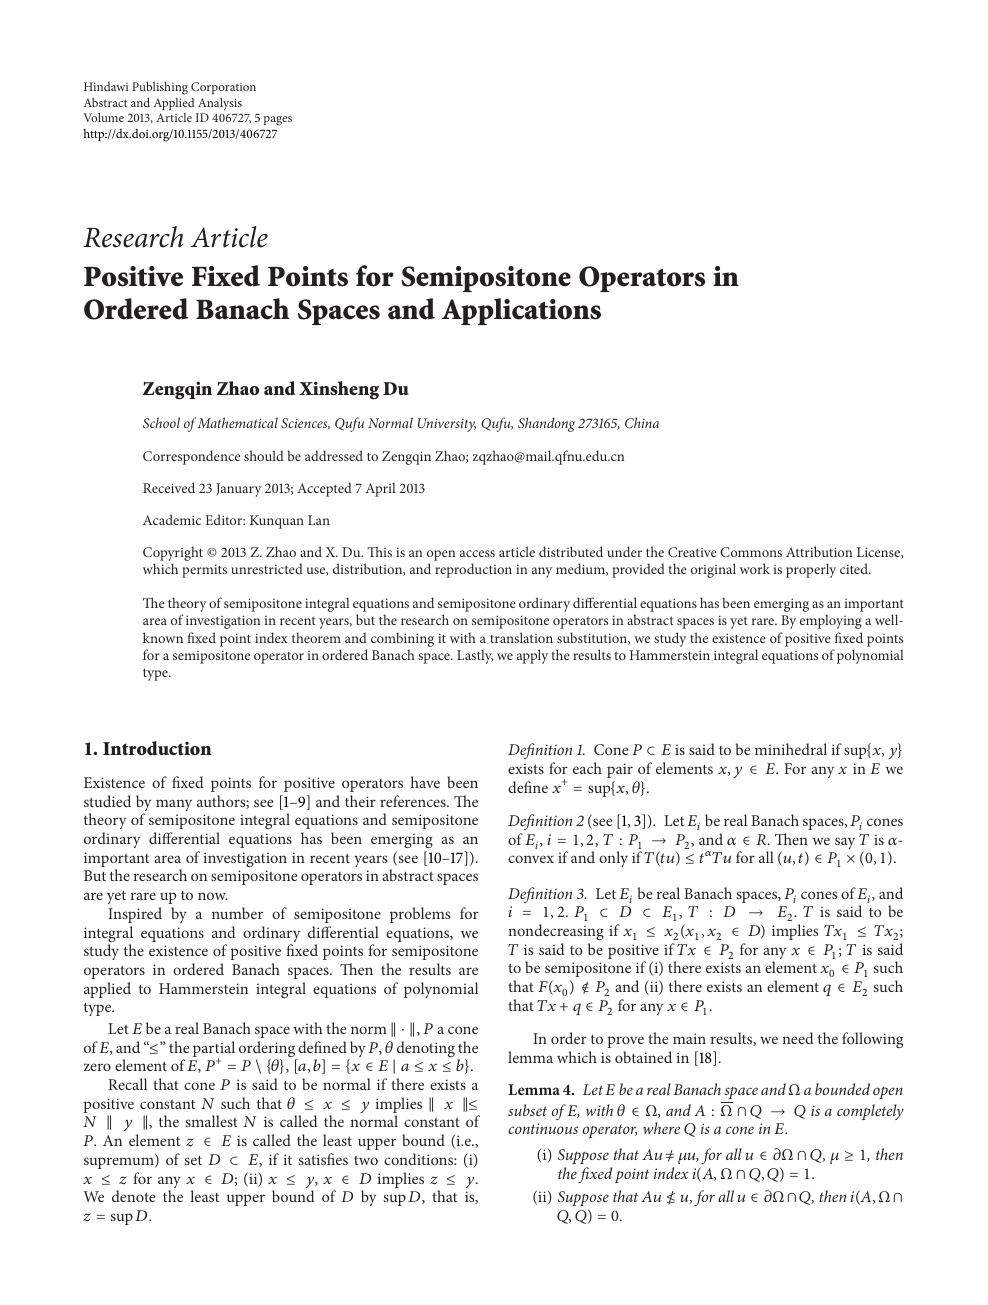 Positive Fixed Points For Semipositone Operators In Ordered Banach Spaces And Applications Topic Of Research Paper In Mathematics Download Scholarly Article Pdf And Read For Free On Cyberleninka Open Science Hub